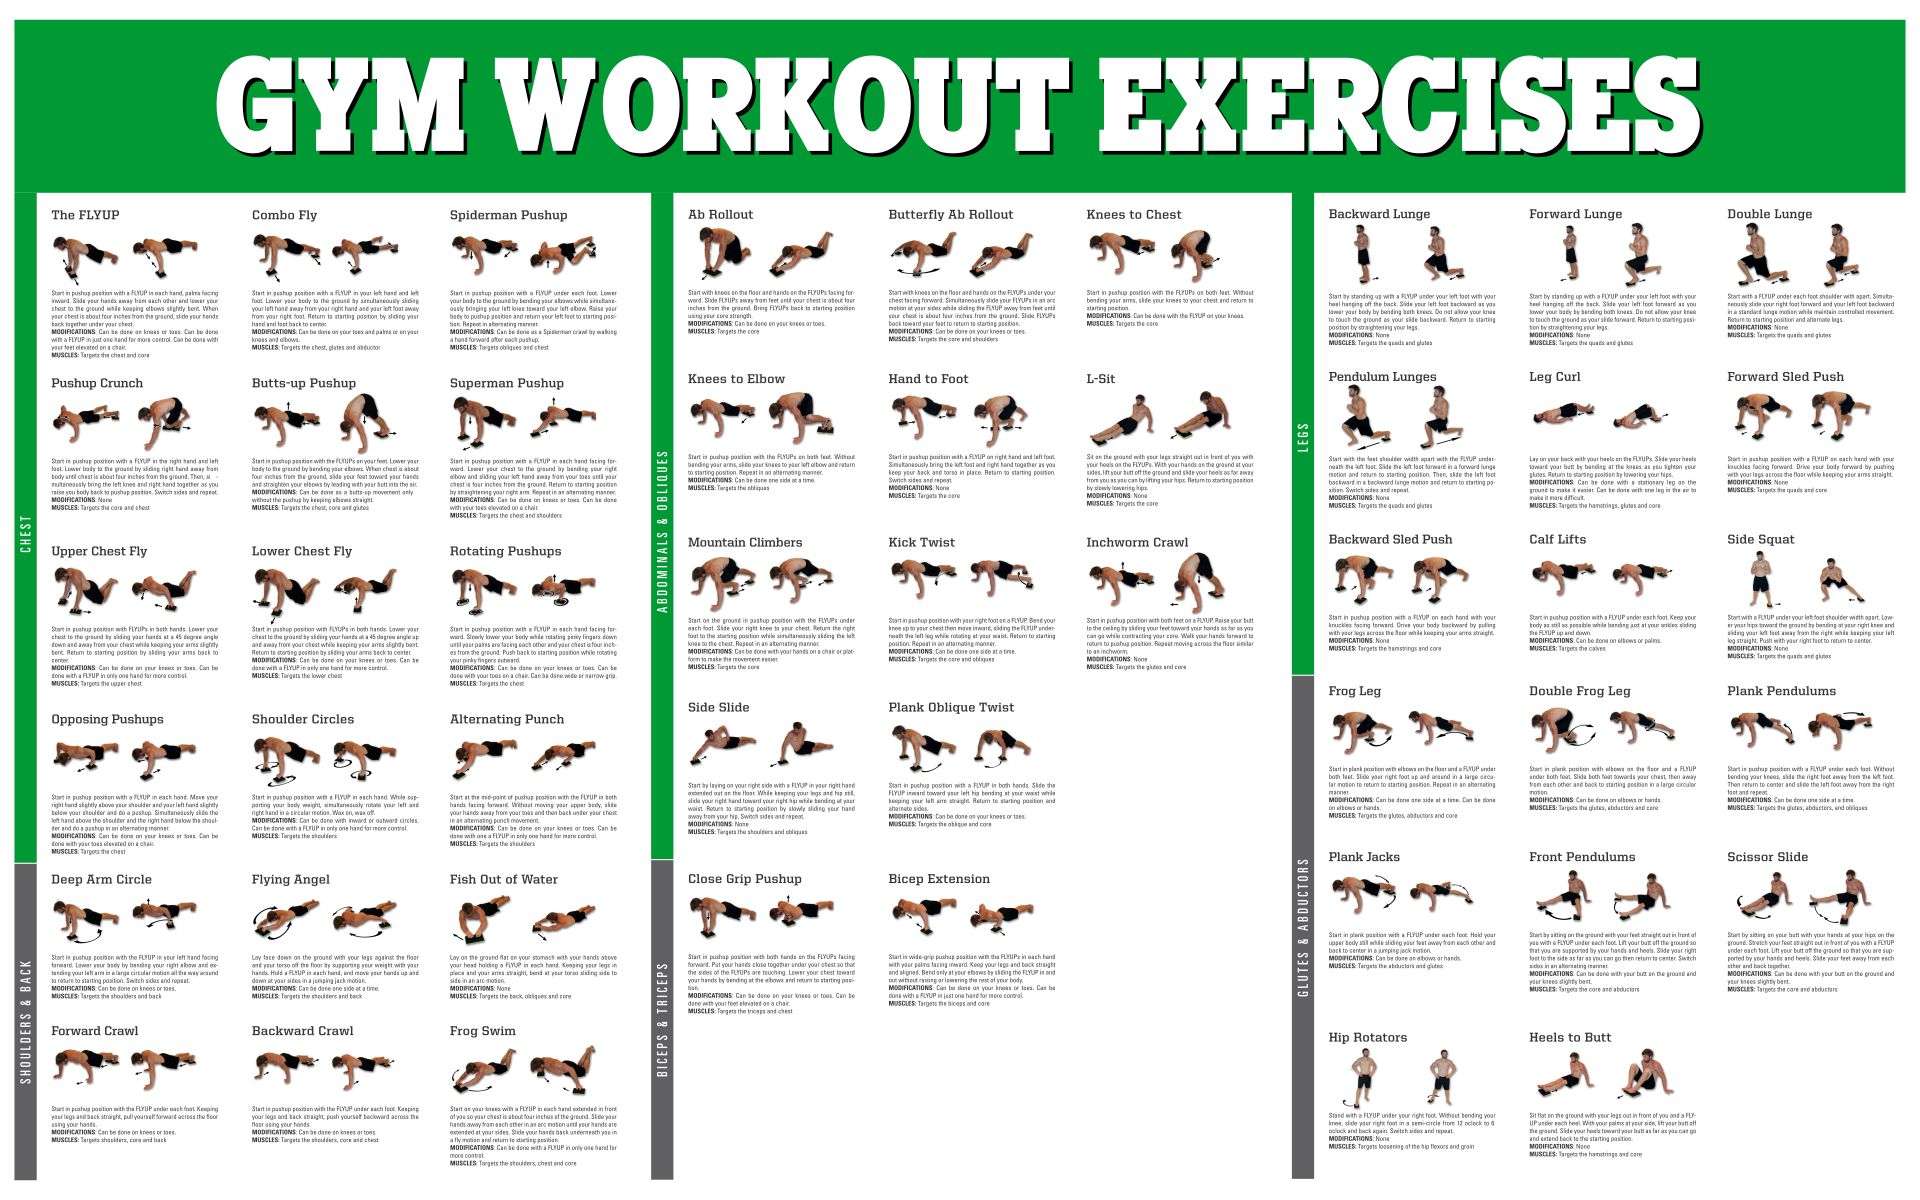 Home workout pdf free download download android apps on windows